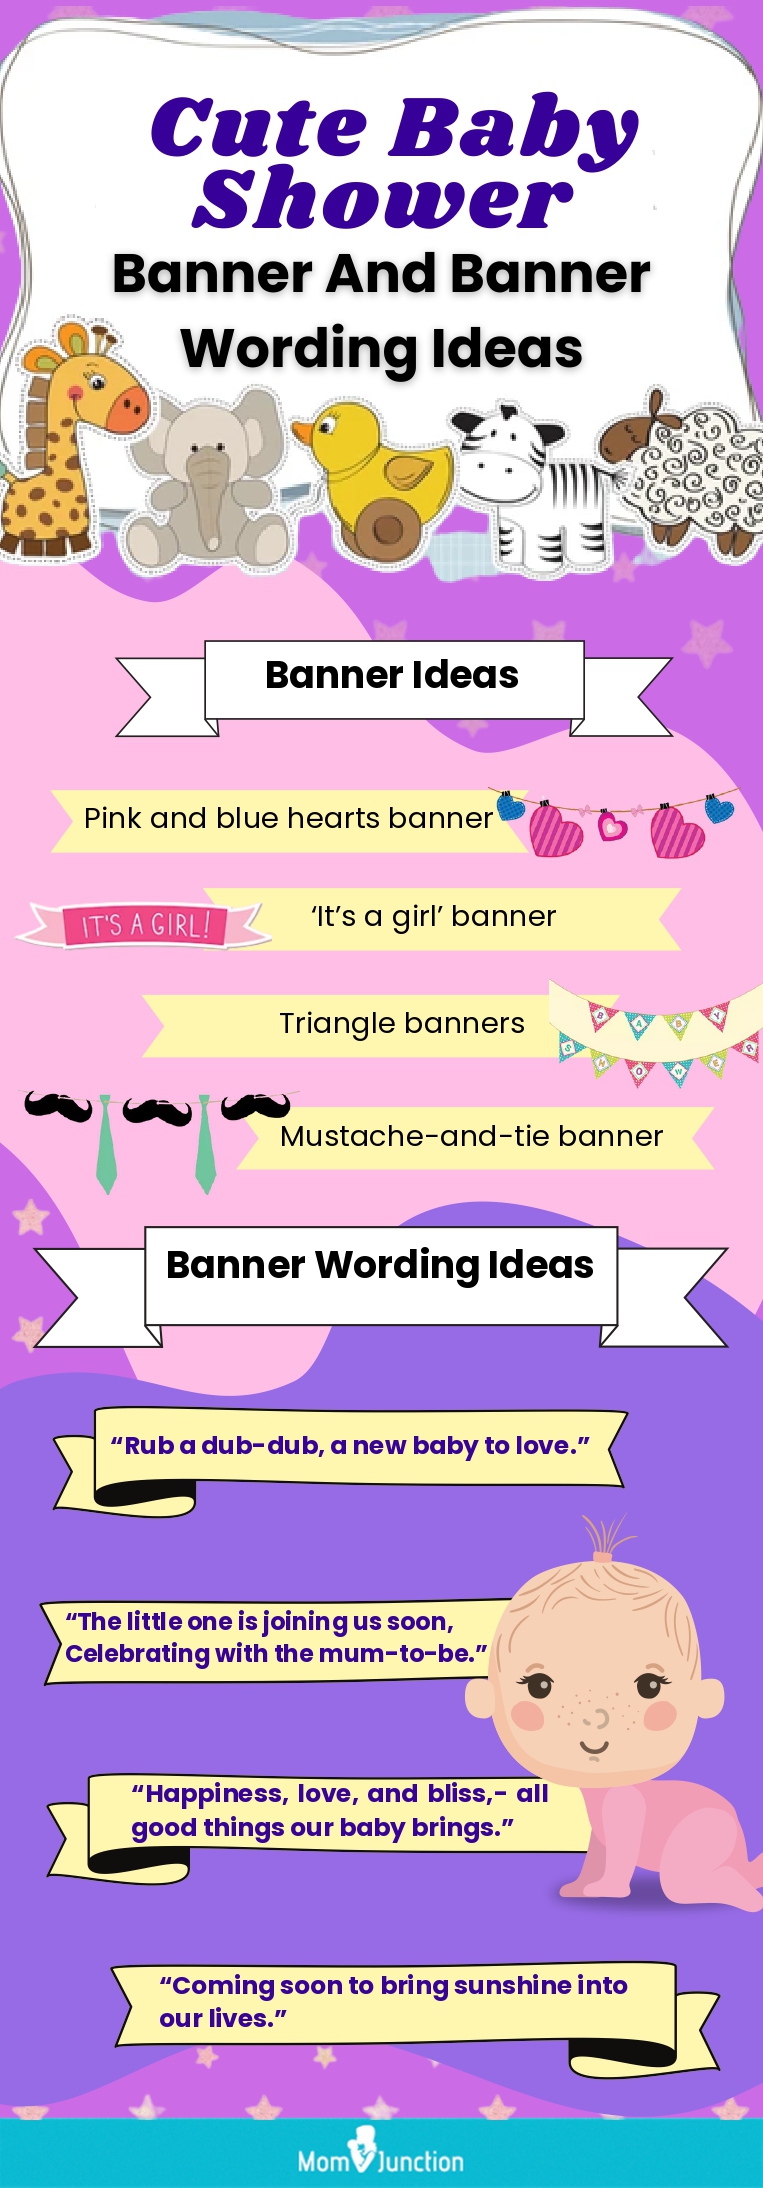 cute baby shower banner and banner wording ideas (infographic)